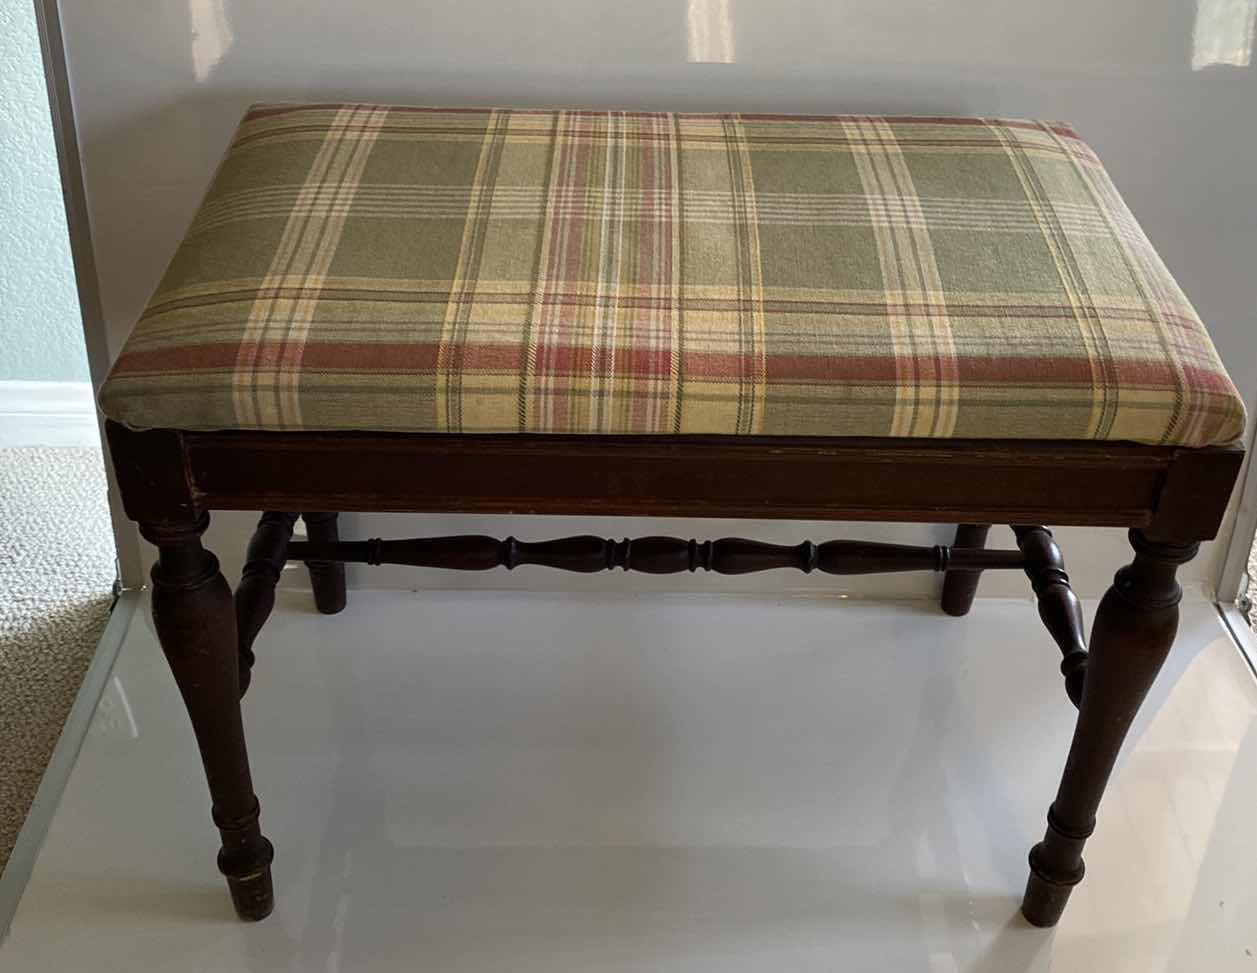 Photo 1 of PLAID UPHOLSTERED BENCH 23“ x 14“ H 18”